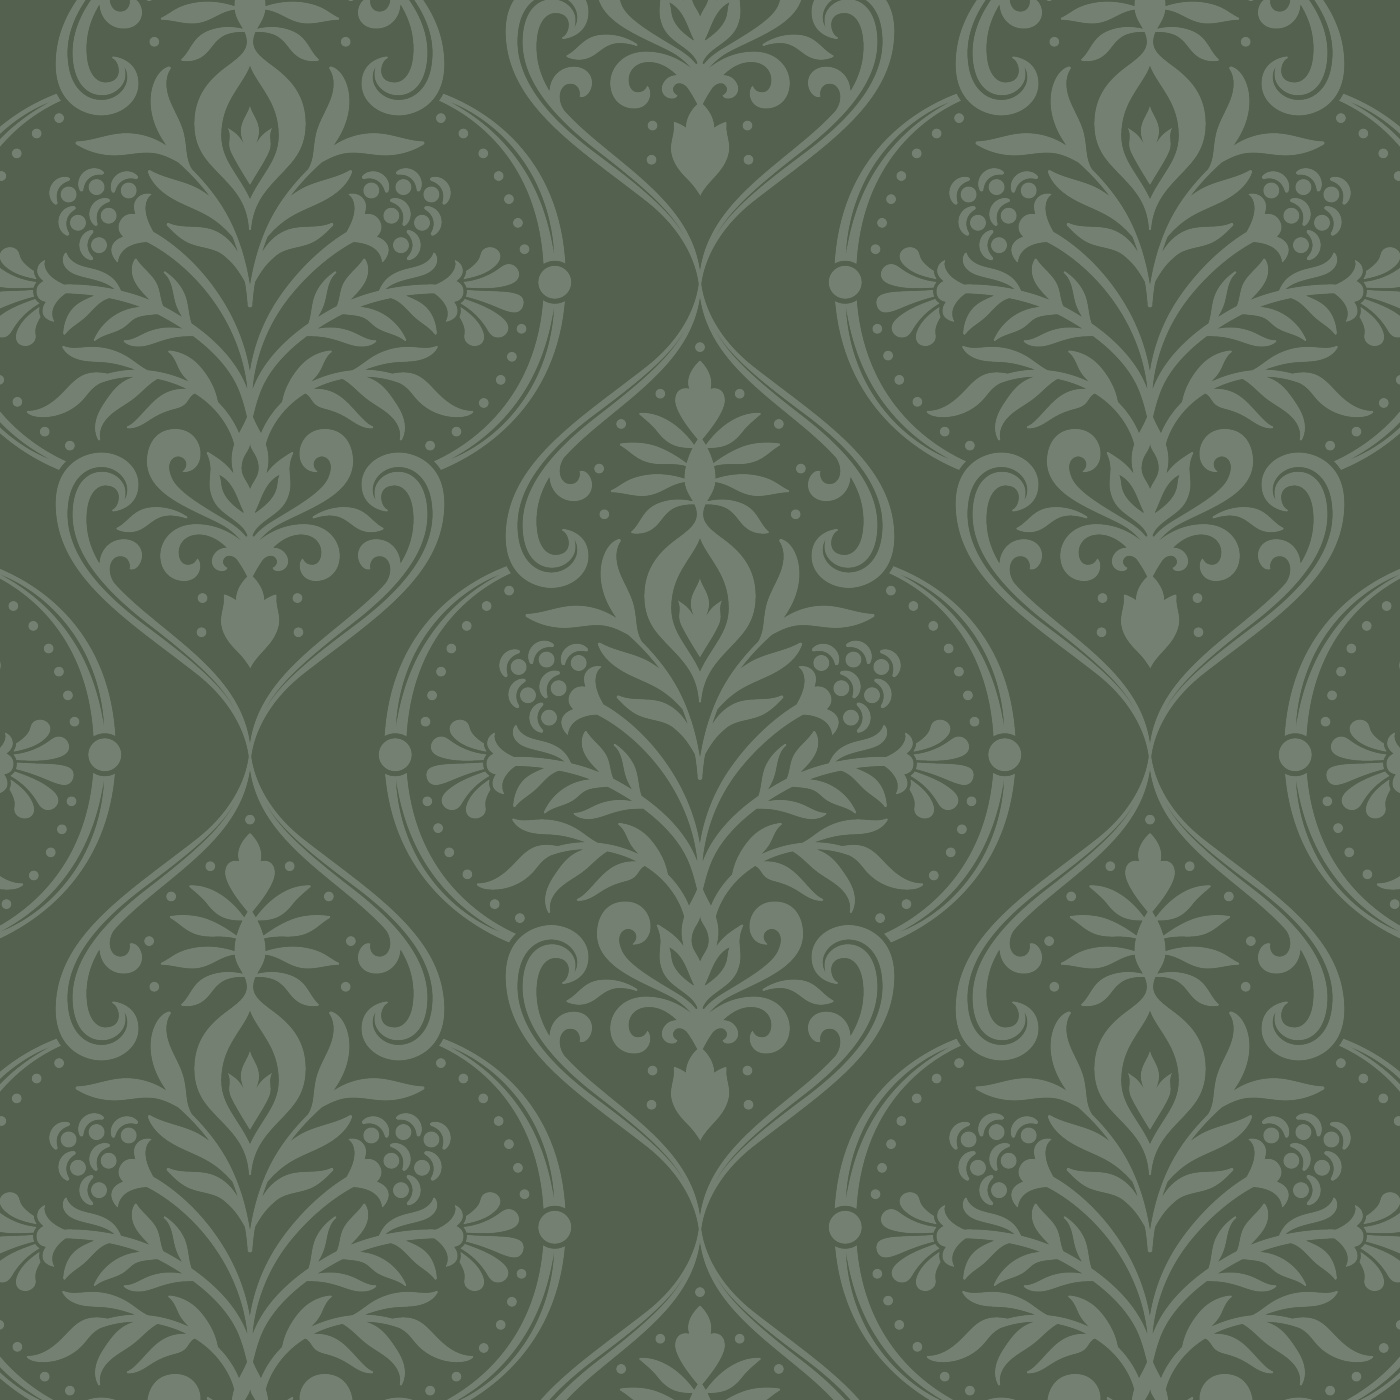 Floral green damask seamless pattern. Dark green floral seamless pattern in  damask style on light green background for | CanStock